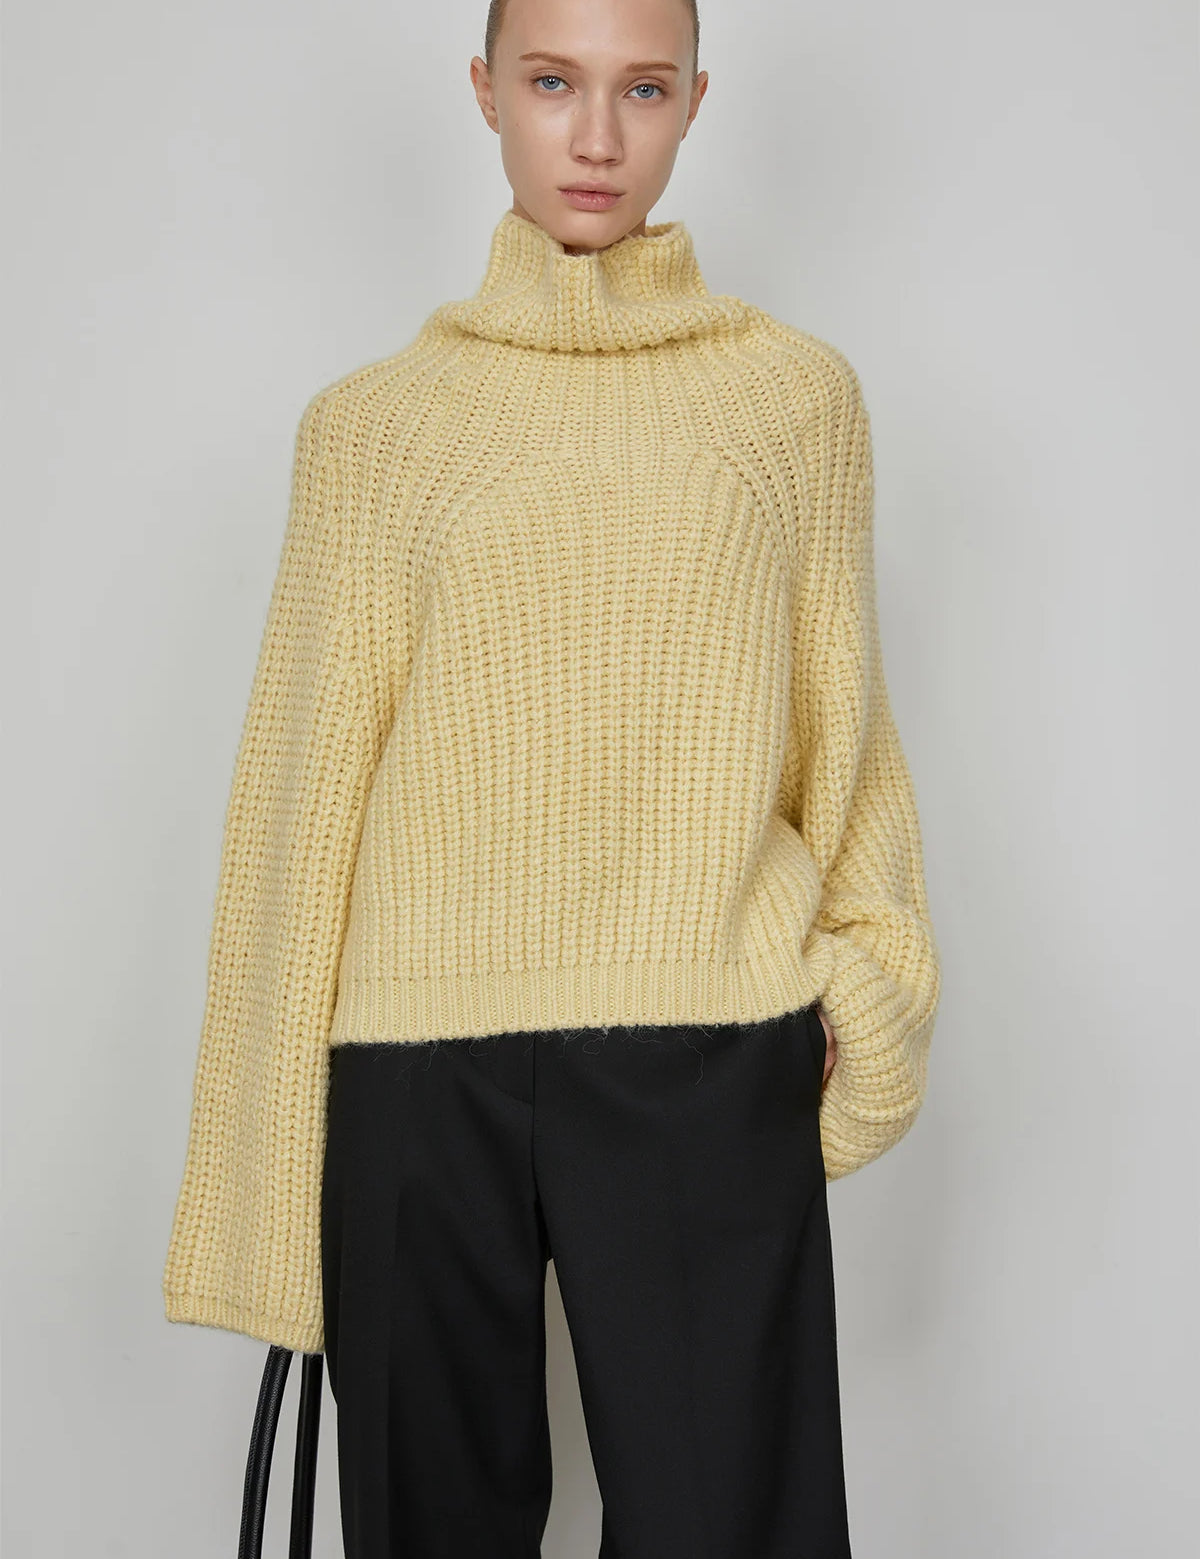 slouchy_high-neck_sweater_le_01.webp